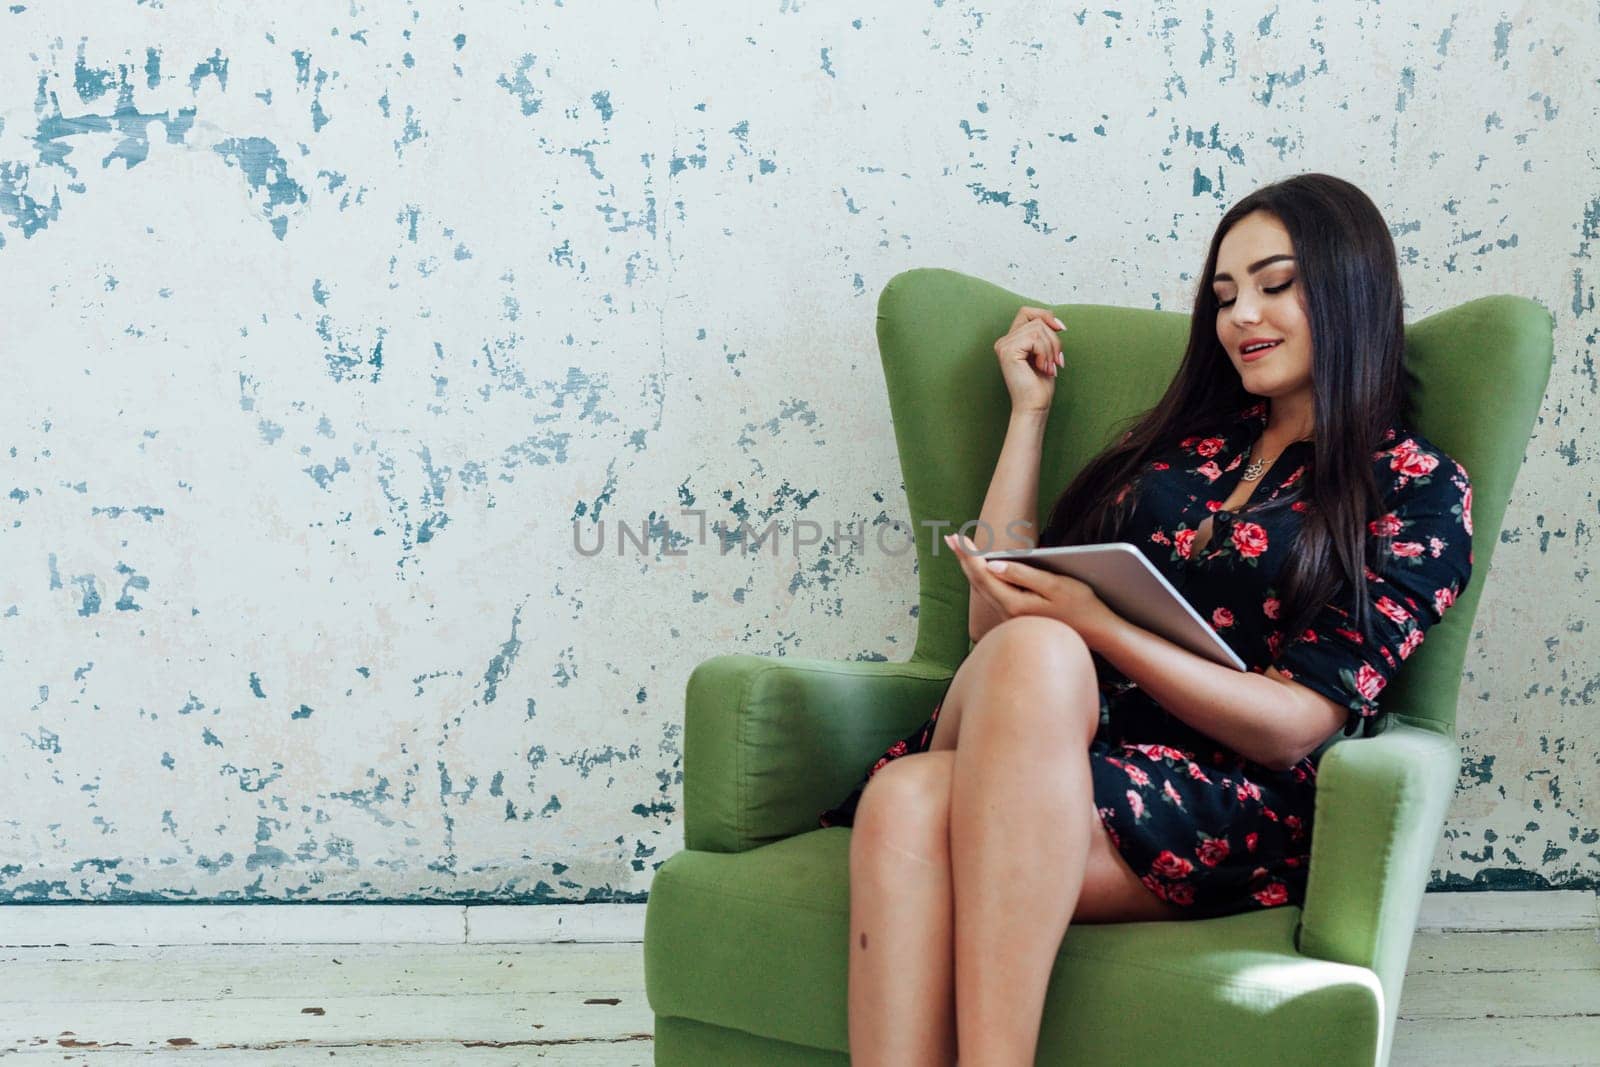 Portrait of a beautiful fashionable woman in a black dress with flowers with an internet tablet in a chair